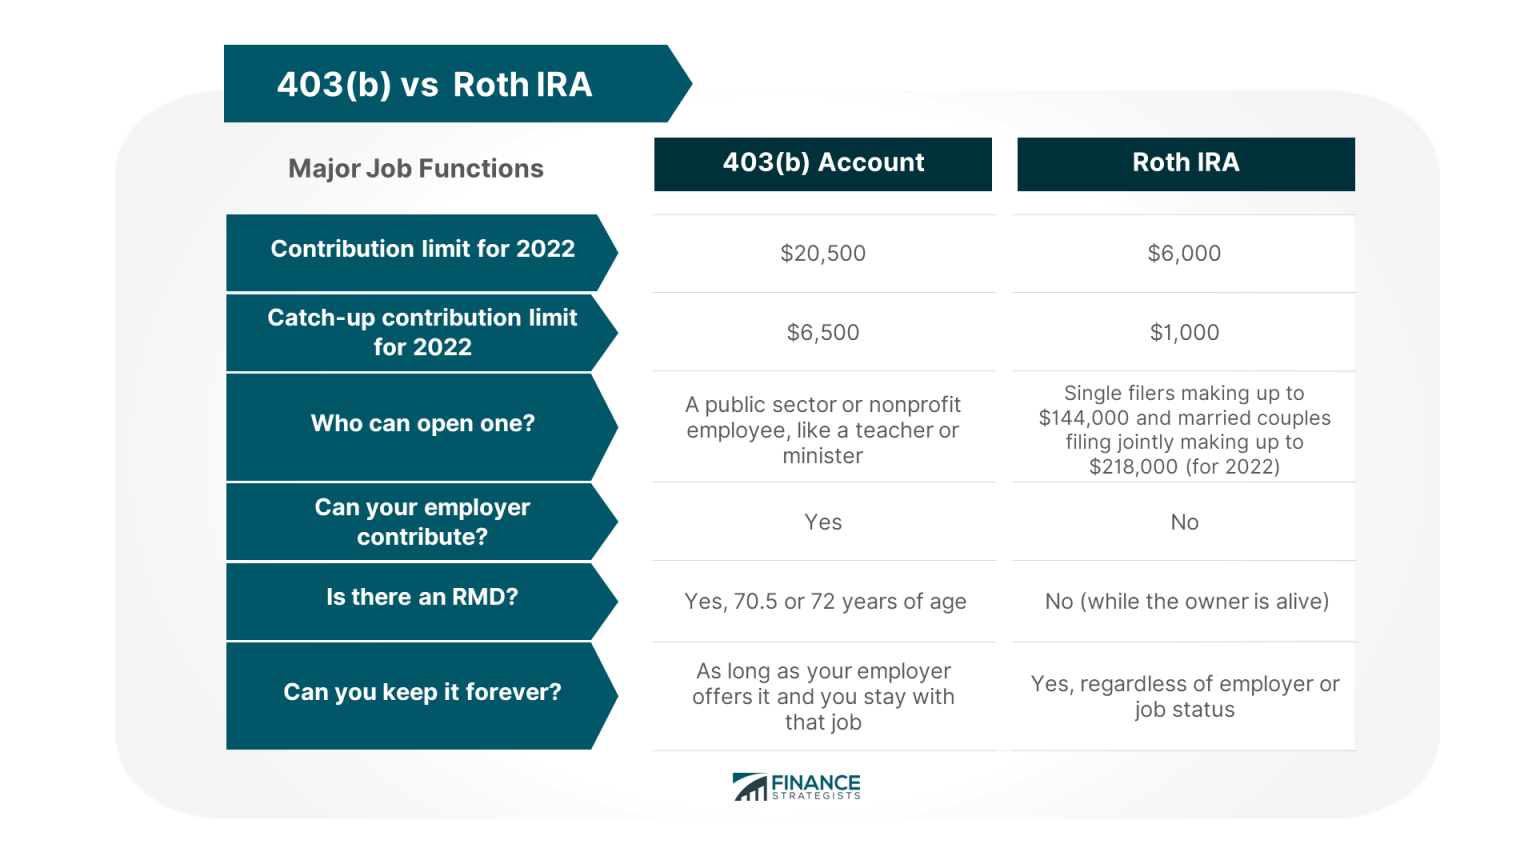 403(b) vs Roth IRA What’s the Difference?